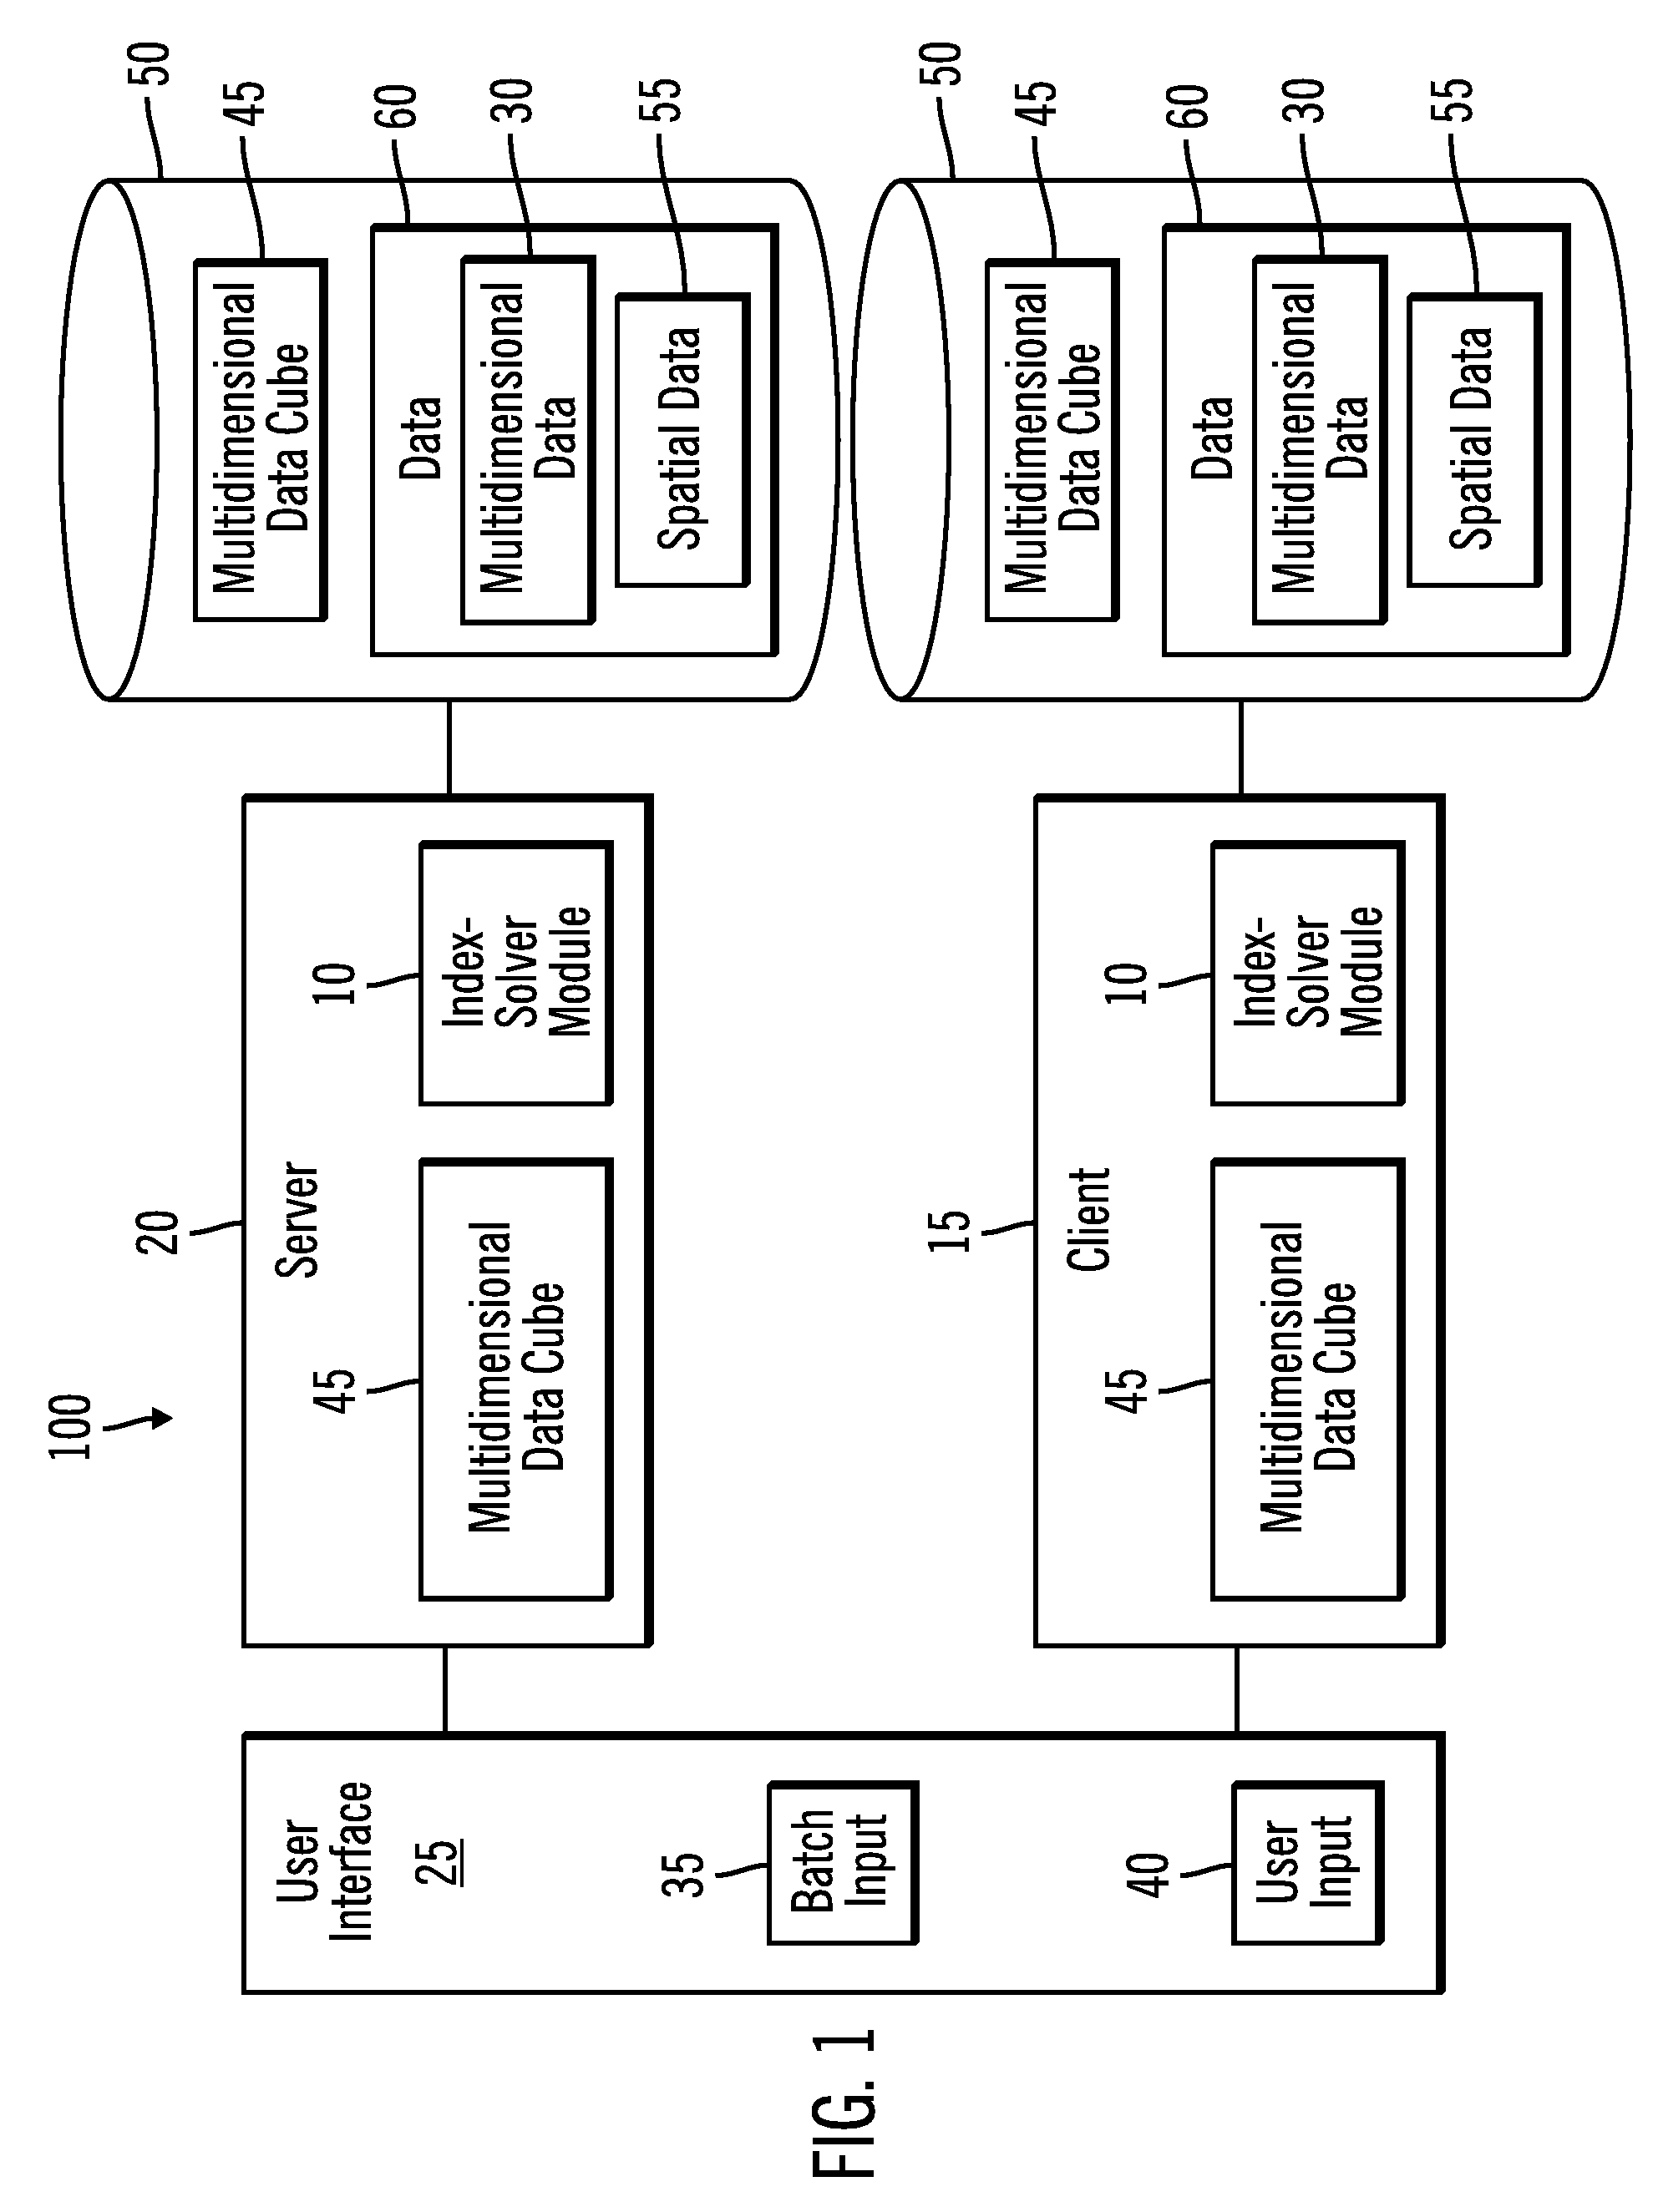 Method for determining an optimal grid index specification for multidimensional data